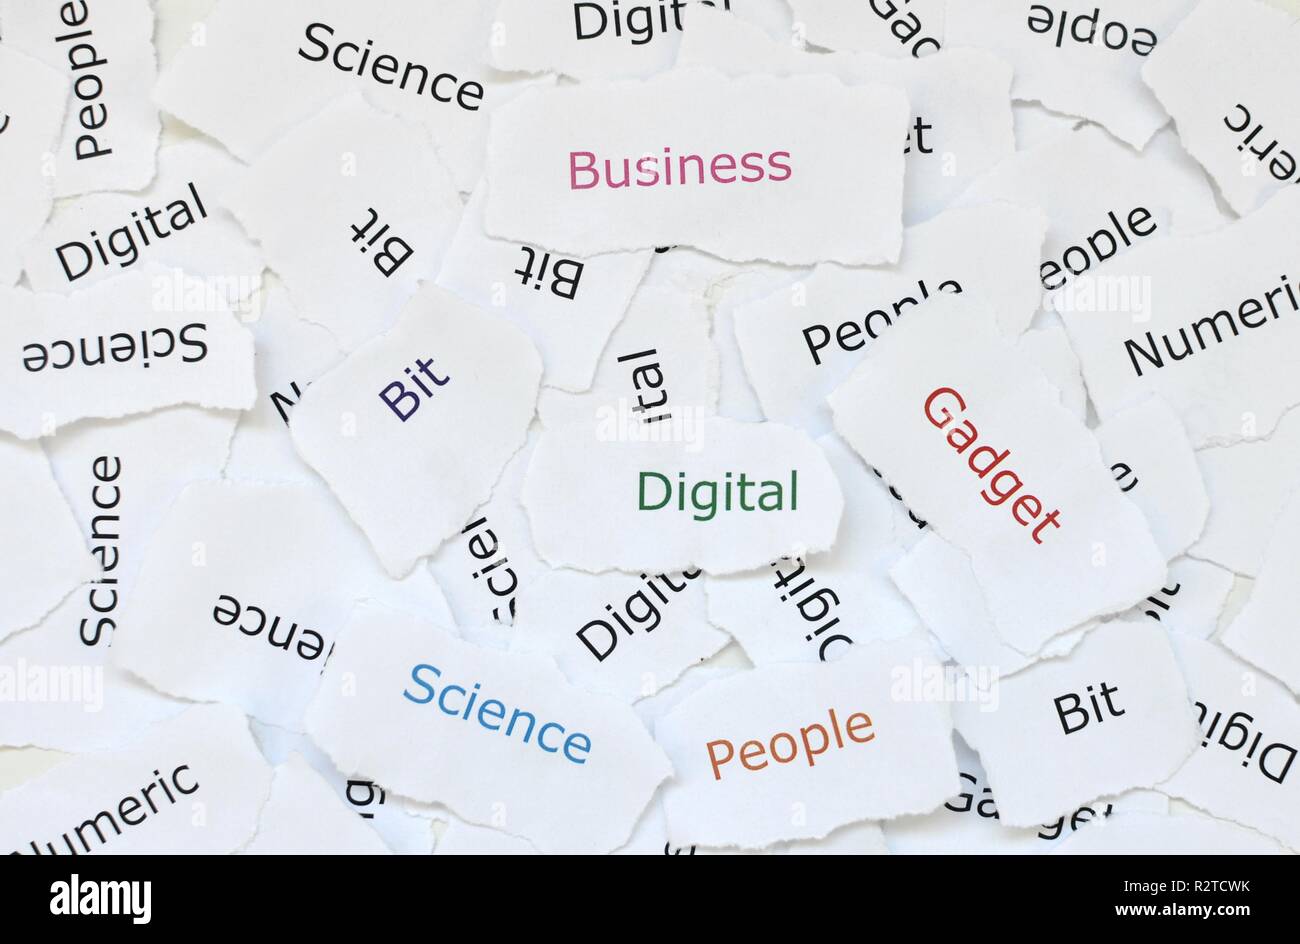 Concept of random little pieces of broken paper printed with words digital, gadget, business, bit, science, people. Background texture symbol Stock Photo